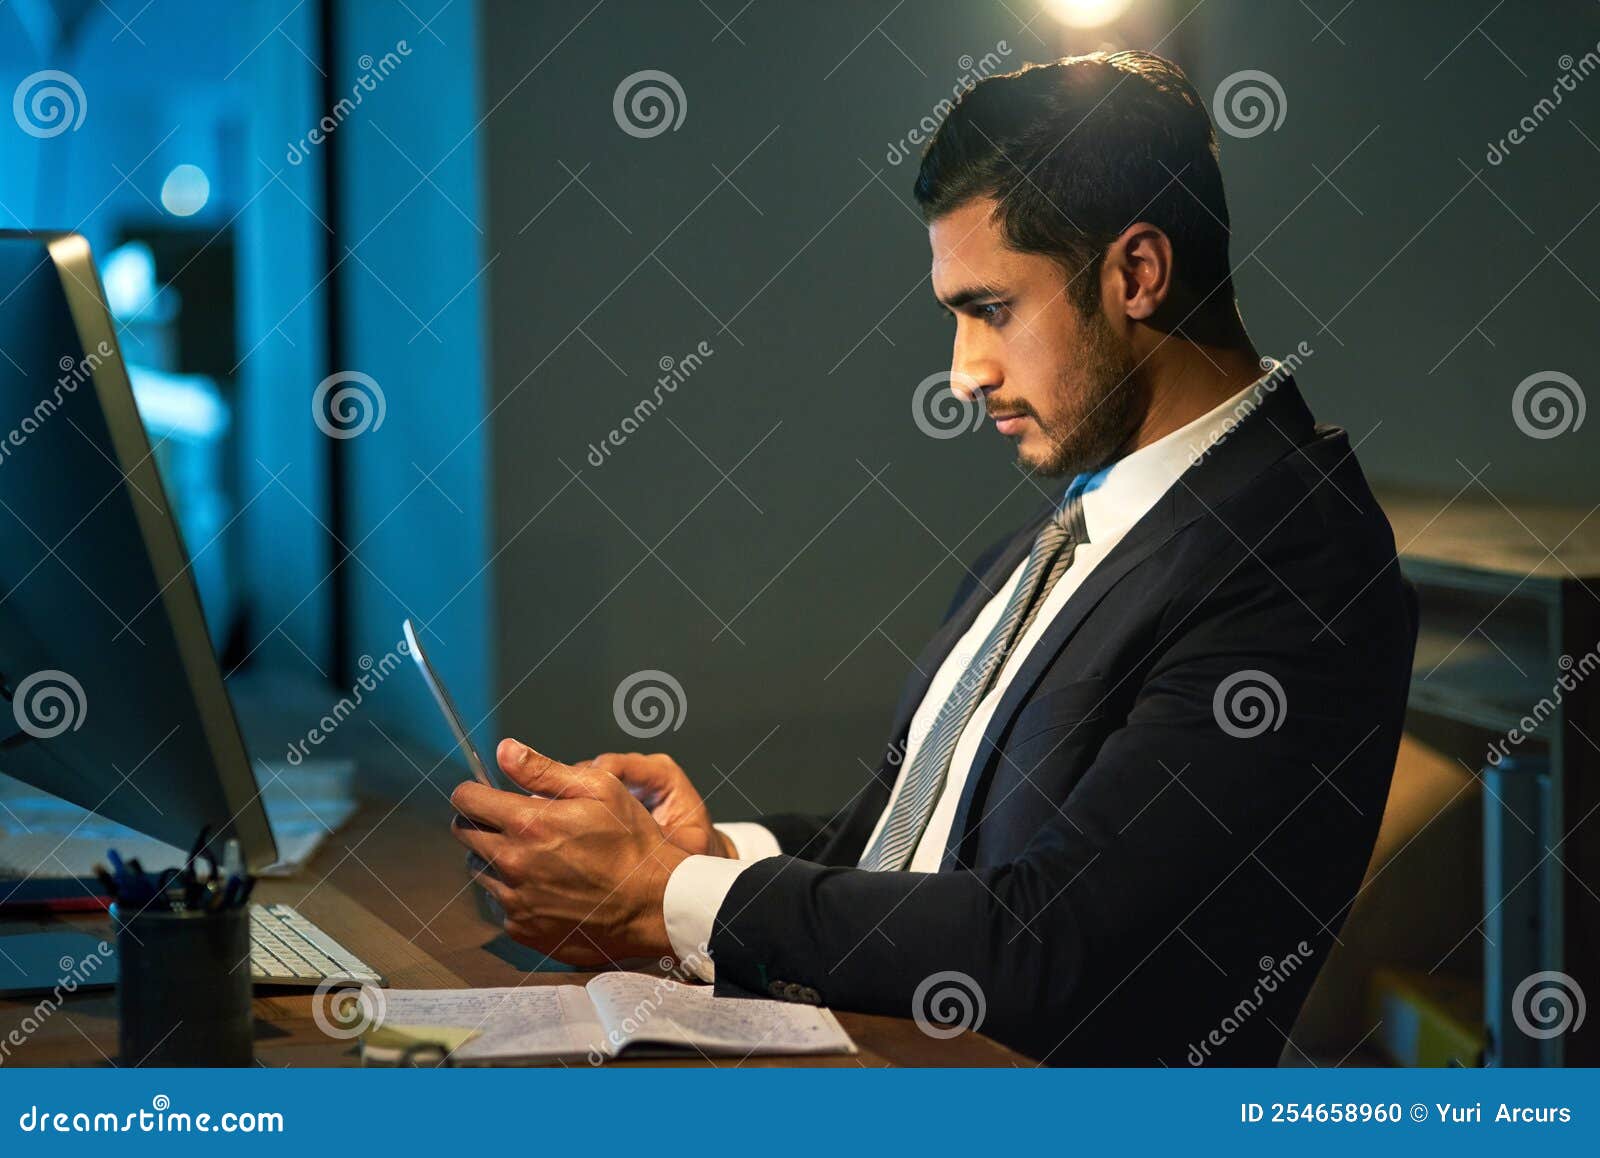 pulling an all nighter. a young businessman using a digital tablet during a late night at work.